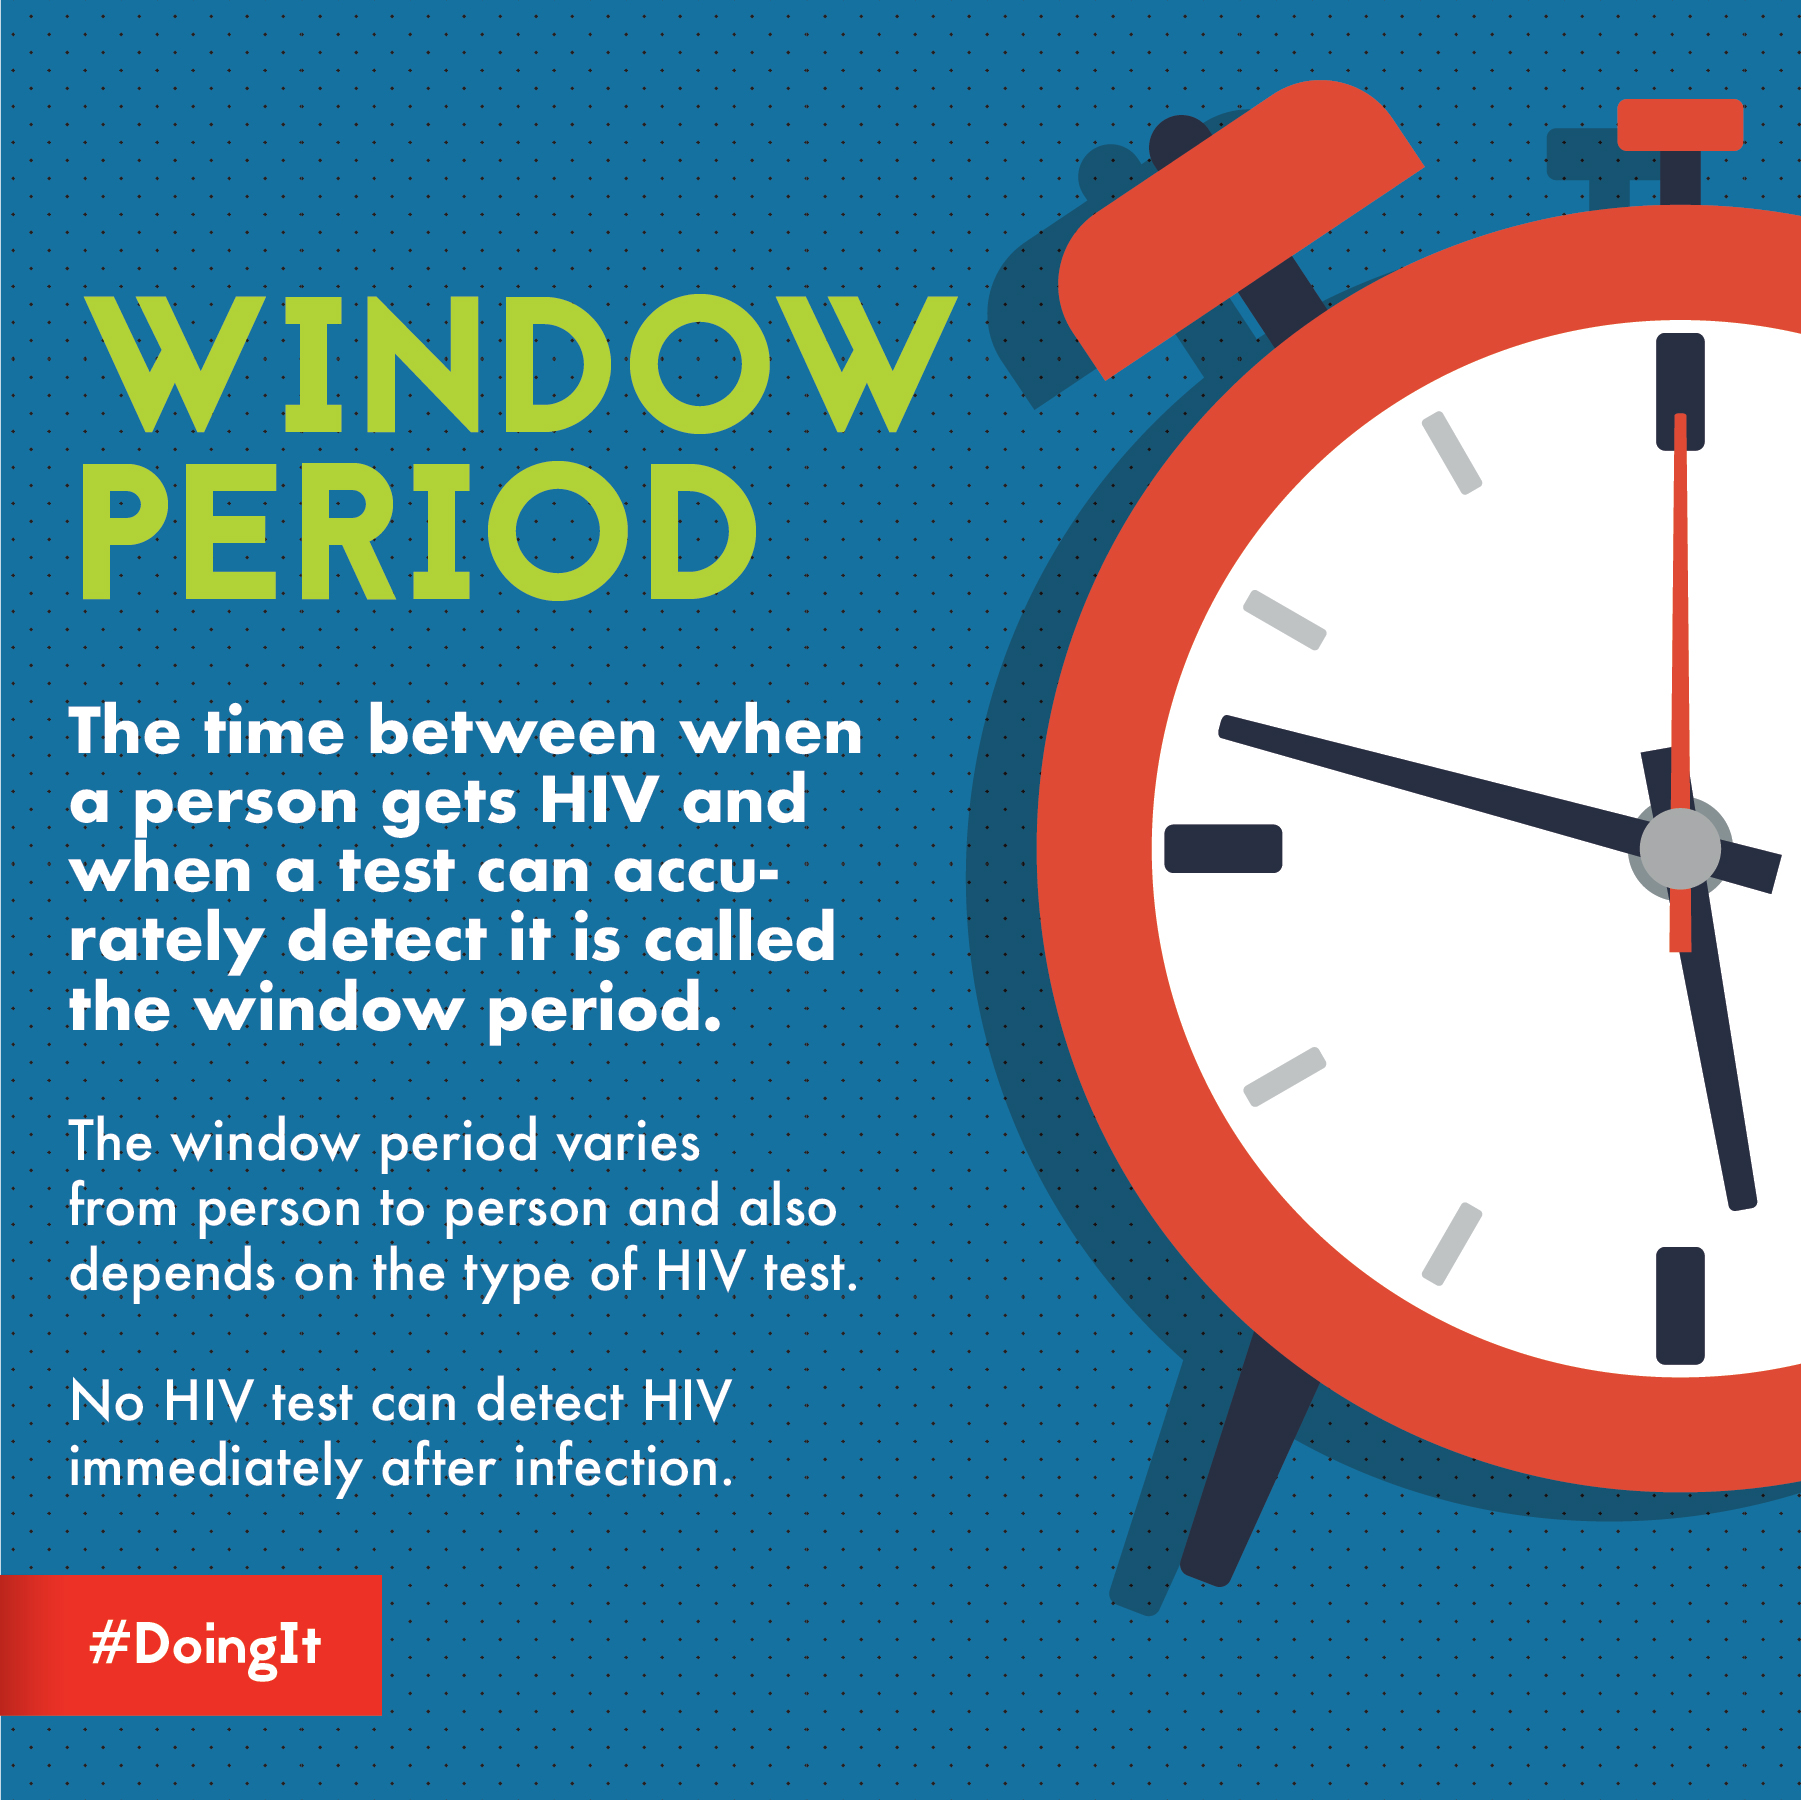 Image displays animation of a clock, along with the following text: WINDOW PERIOD The time between when a person gets HIV and when a test can accurately detect it is called the window period. The window period varies from person to person and depends on the type of HIV test. No HIV test can detect HIV immediately after infection.